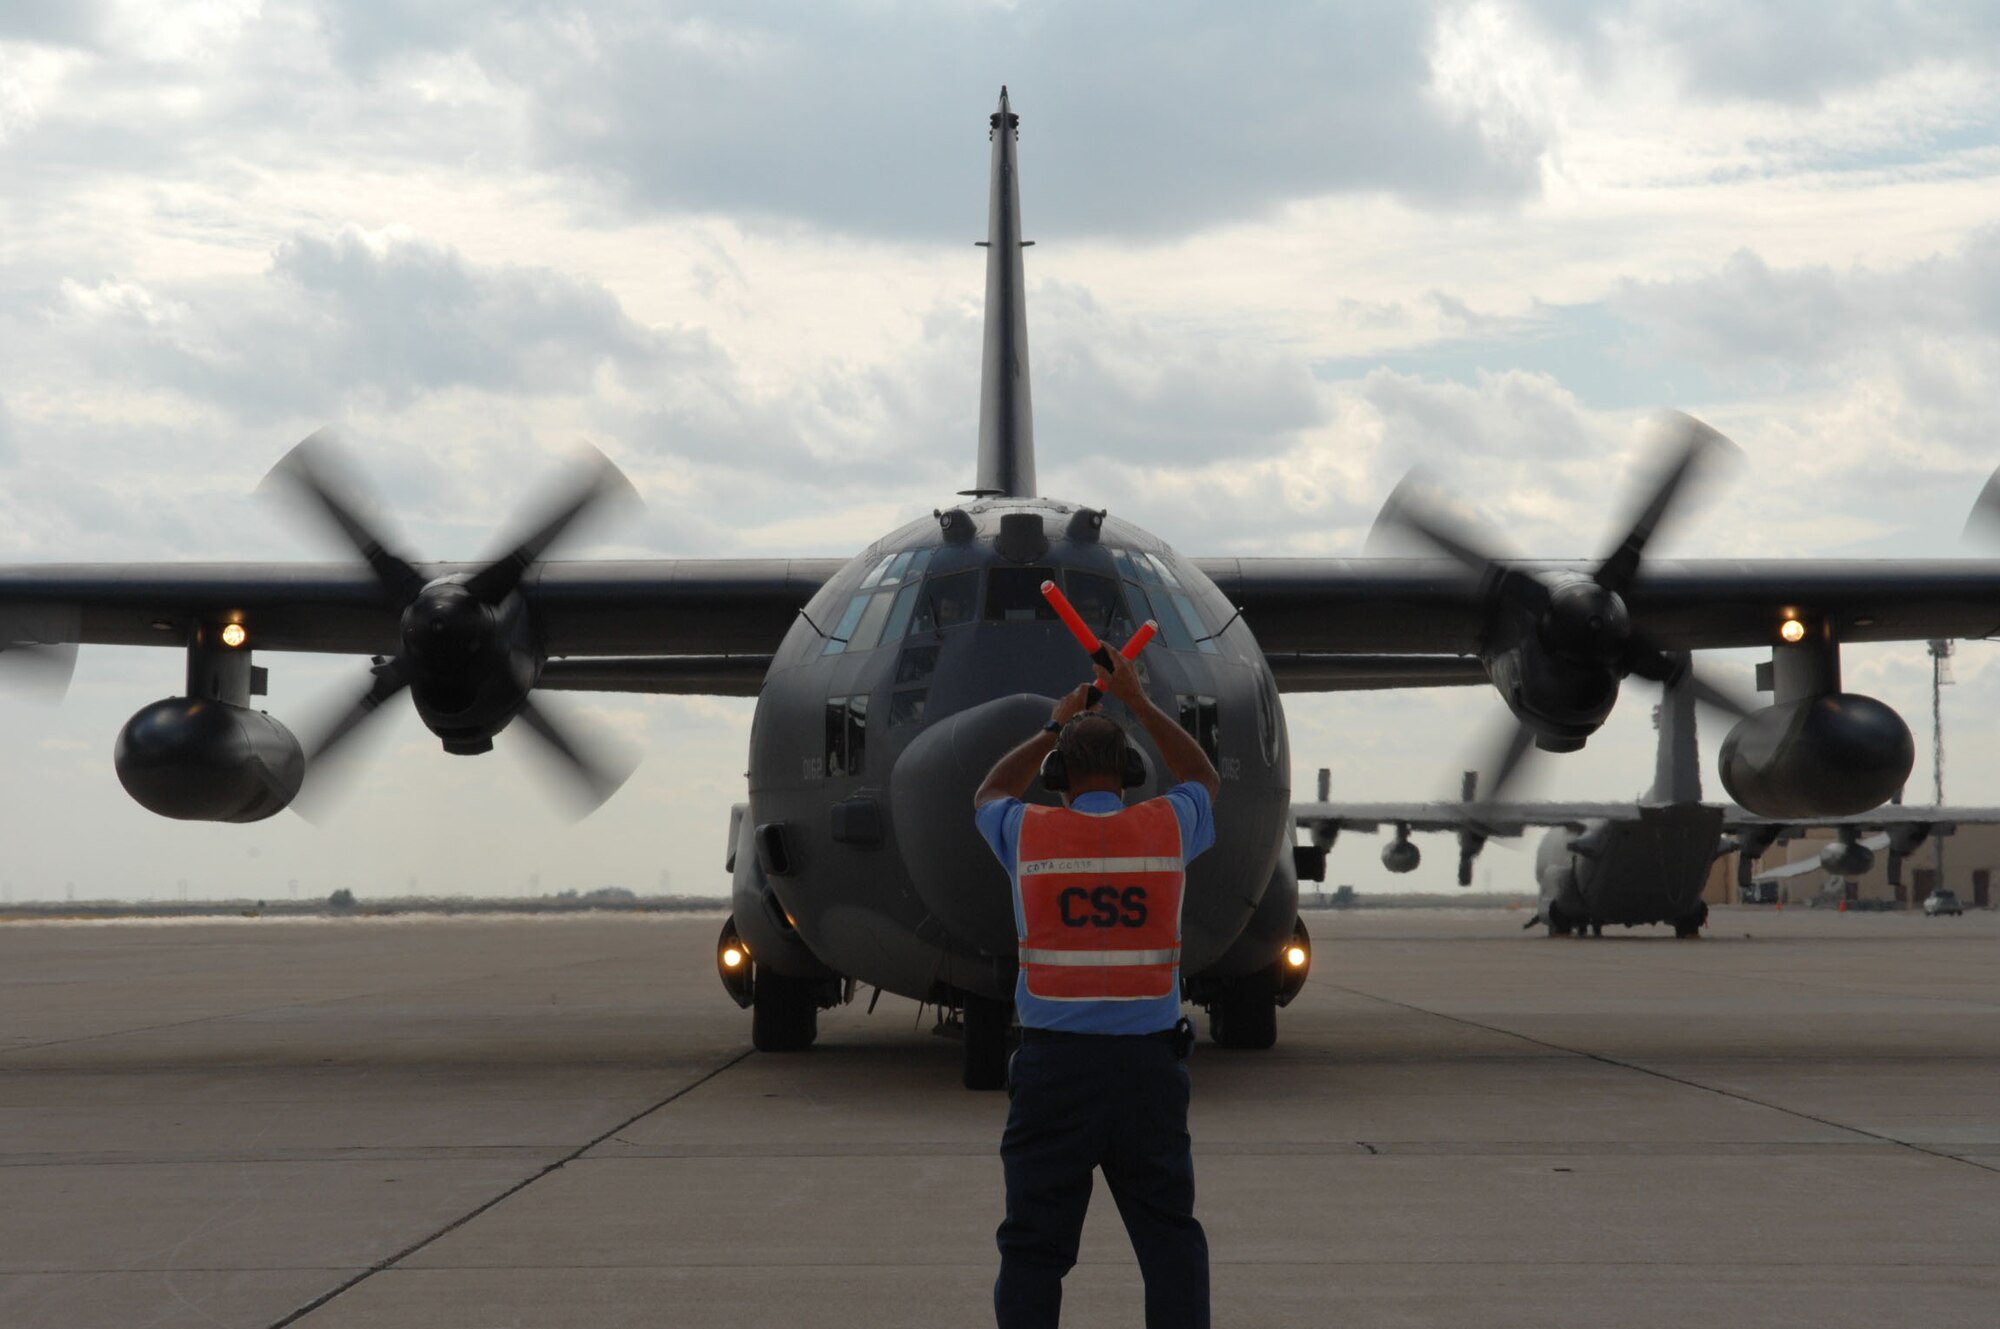 CANNON AIR FORCE BASE, N.M. -- A crew chief leads in an MC-130H Combat Talon after it landed at Cannon Air Force Base September 29. Air Force Special Operations Command assumed command of Cannon in a change-of-command ceremony Oct. 1. (U.S. Air Force photo by Staff Sgt. April Wickes)